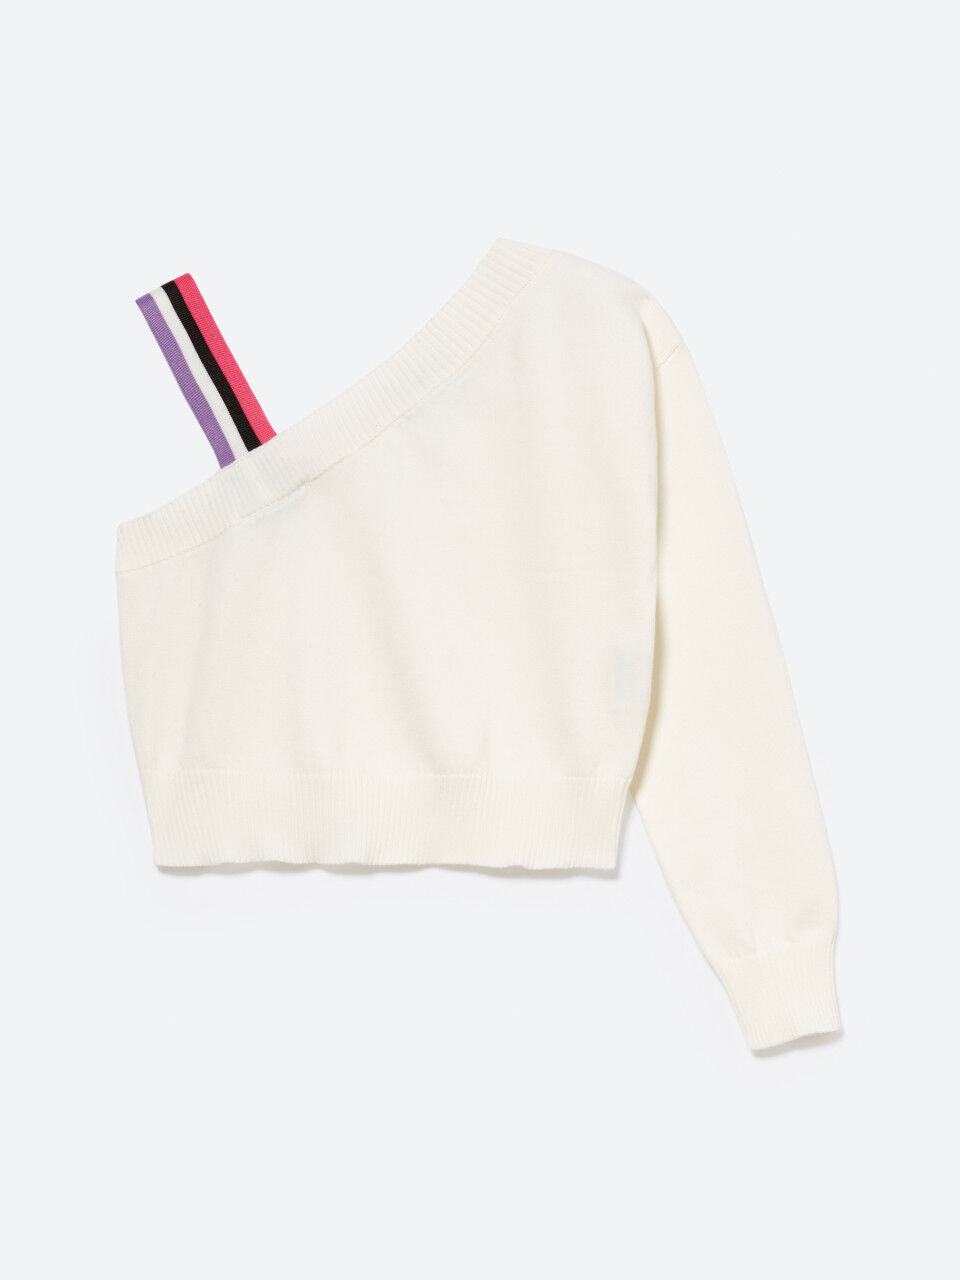 Single-shoulder sweater with striped elastic